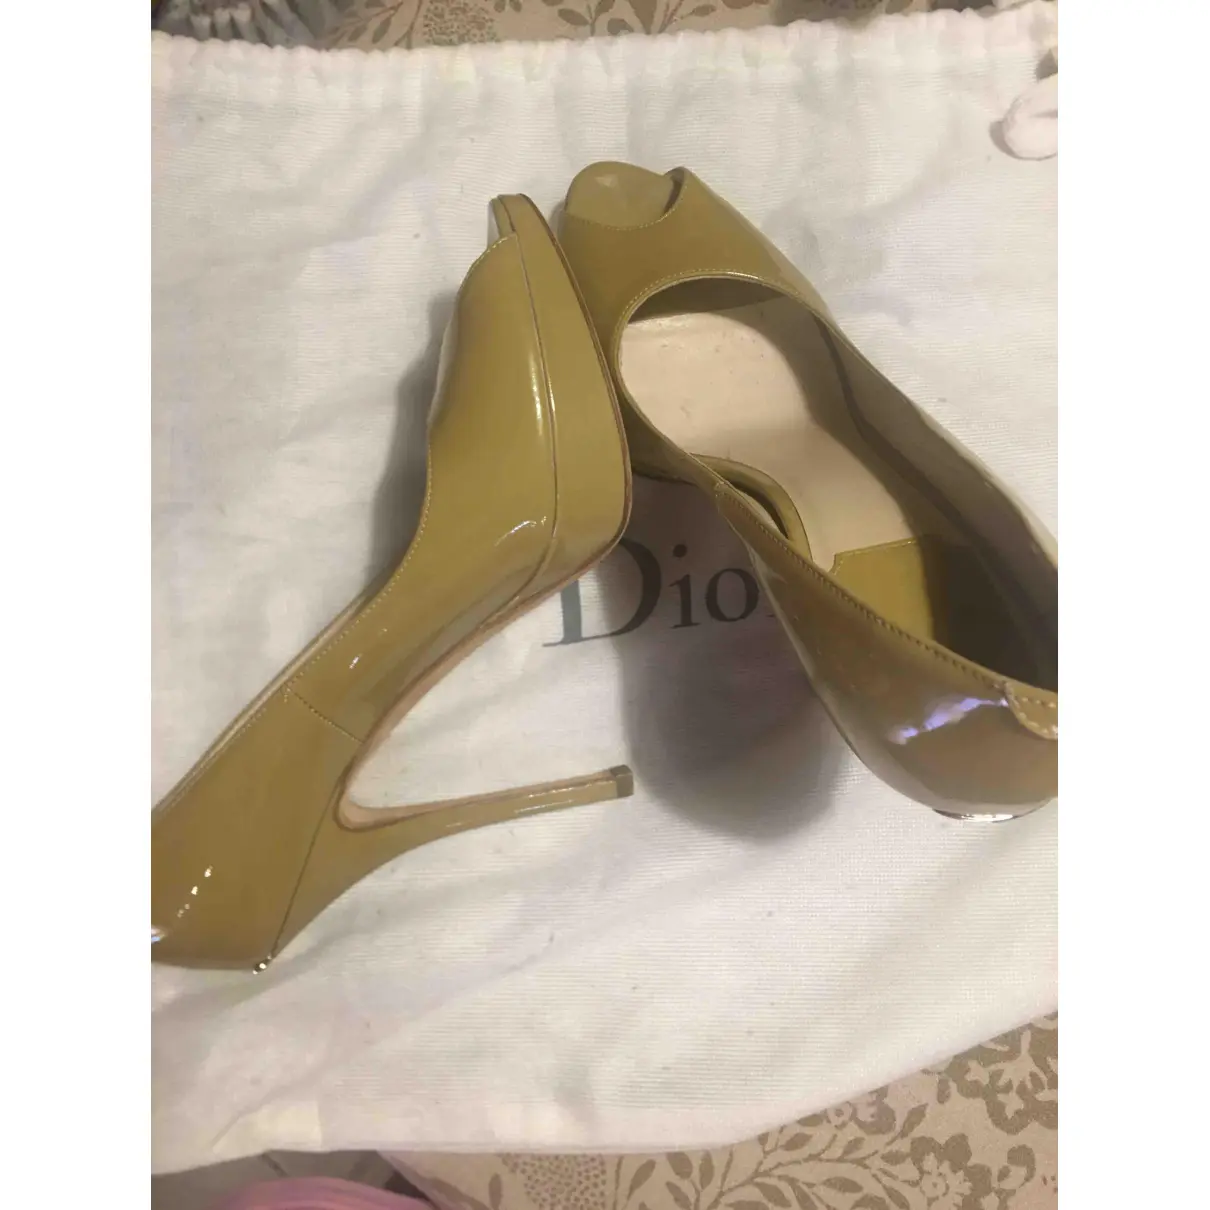 Miss Dior Peep Toes patent leather heels Dior